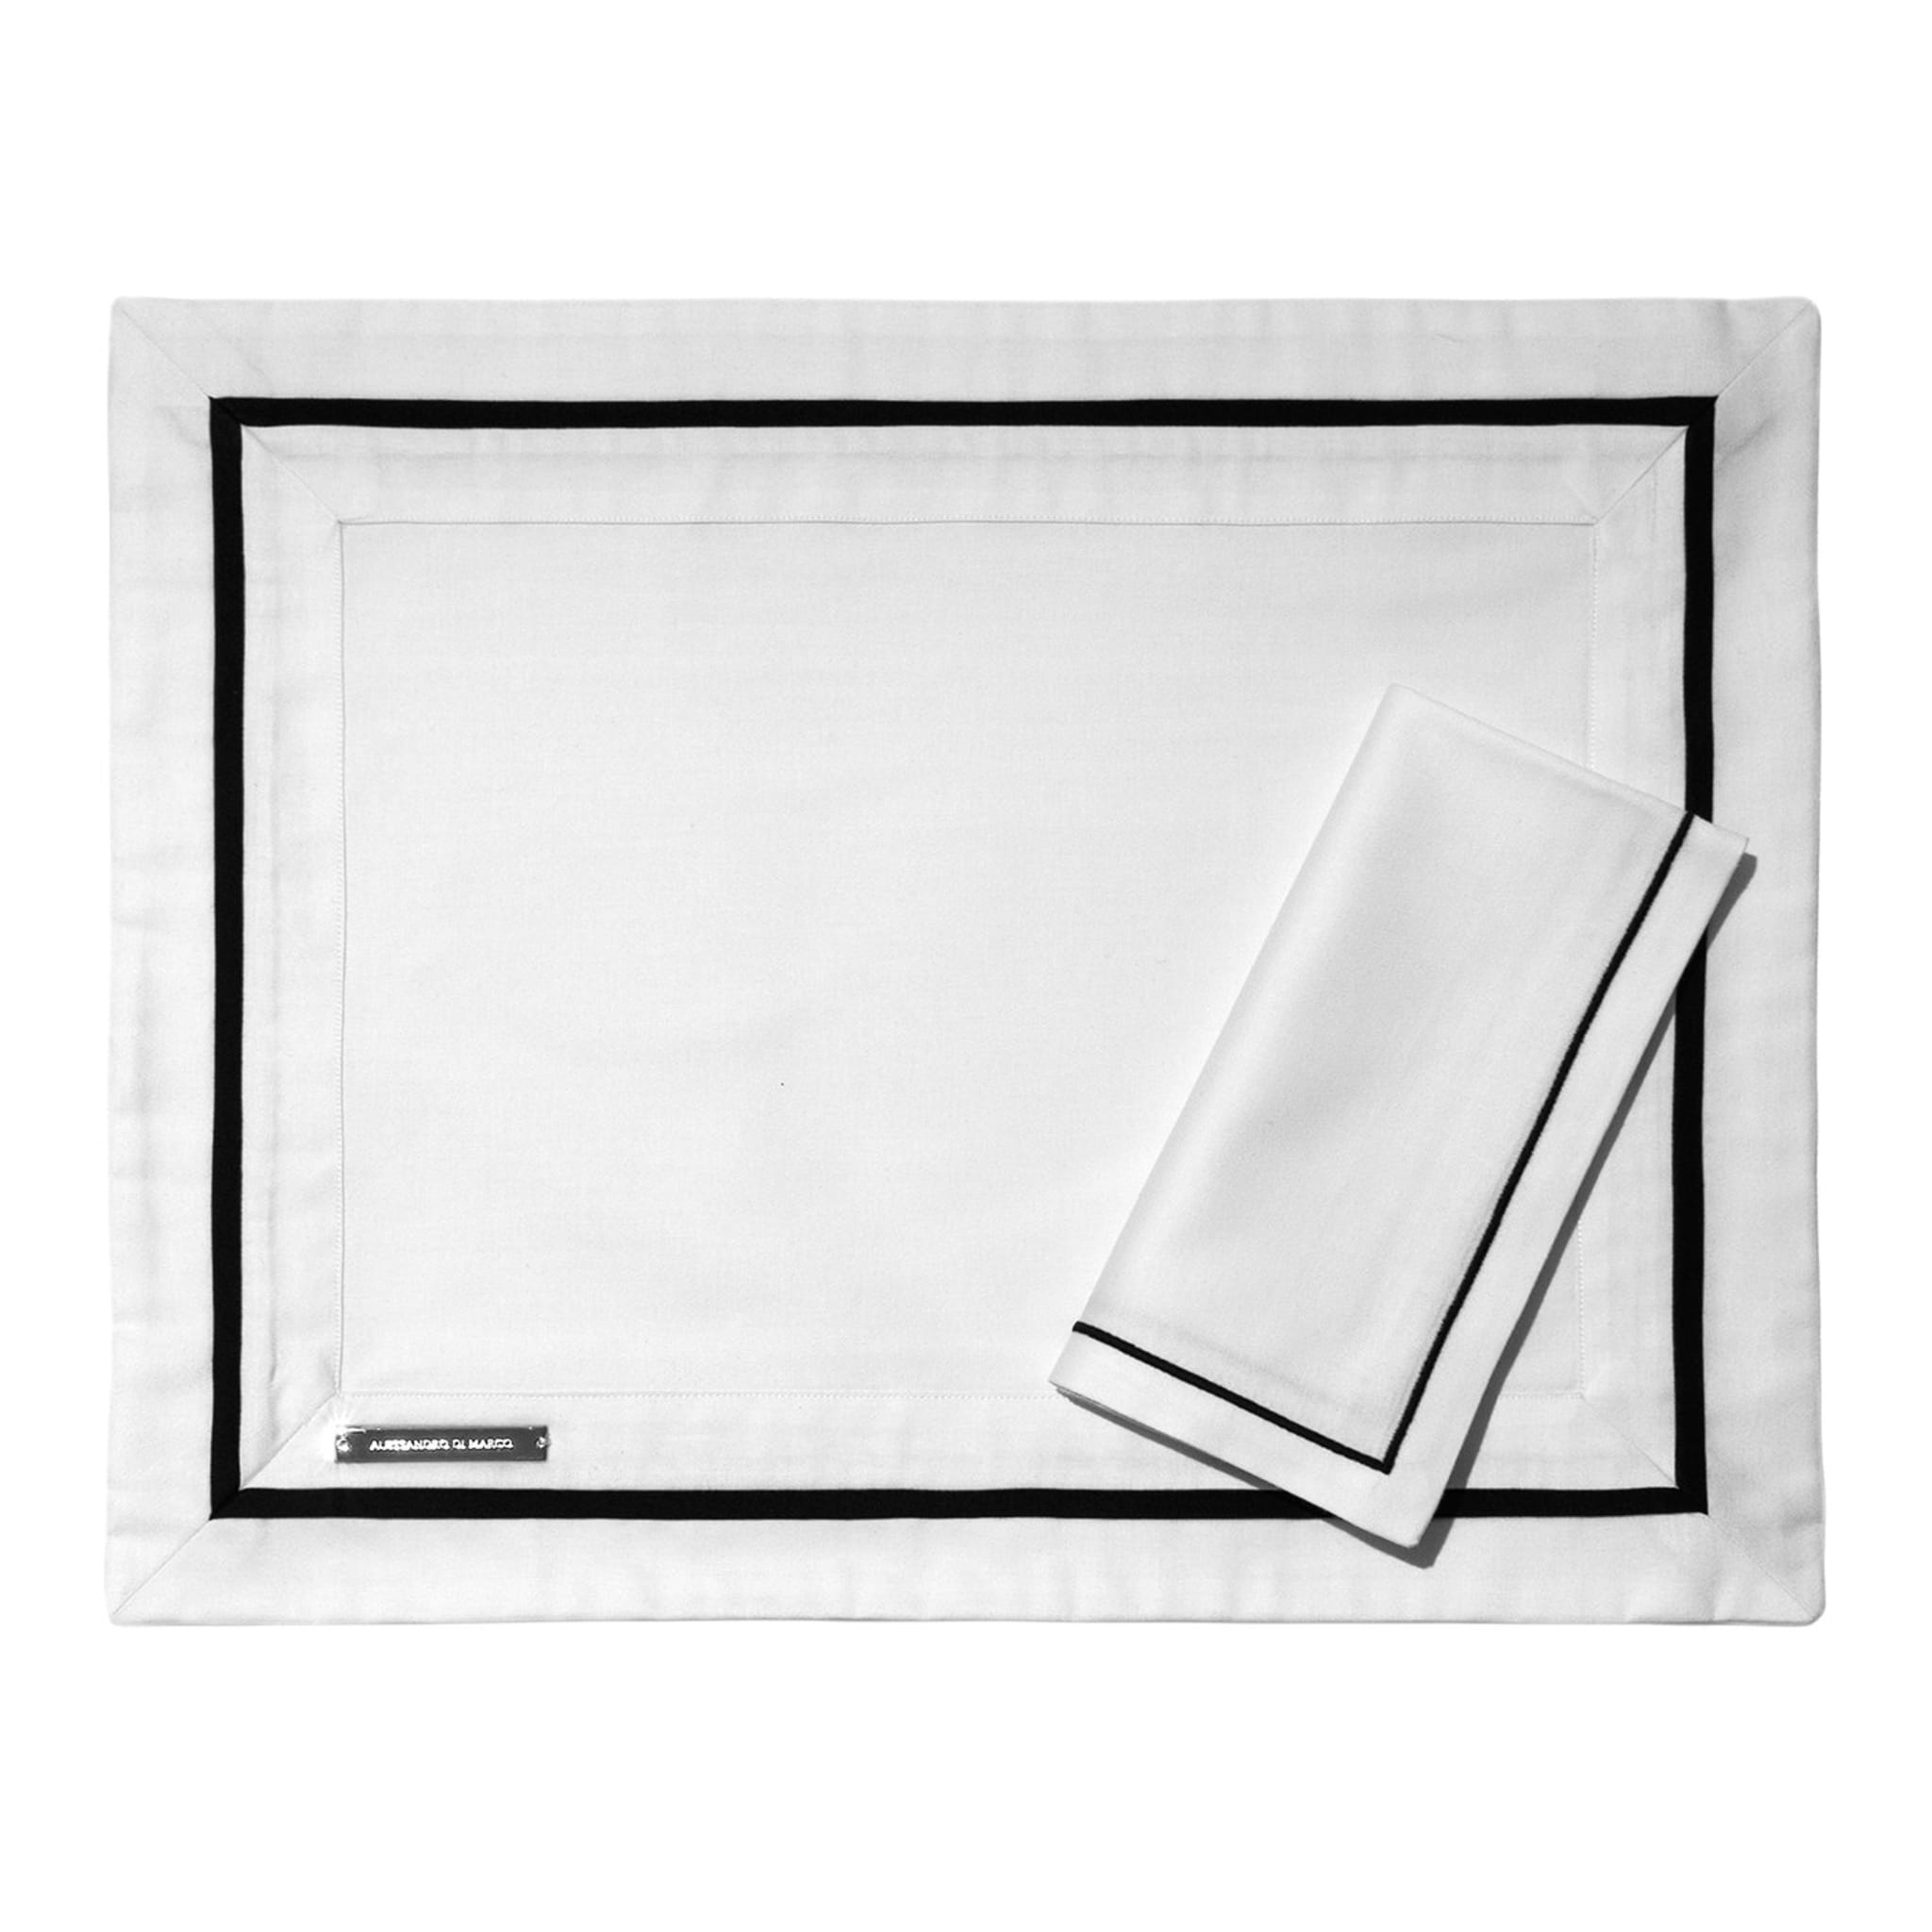 Placemats and Napkins - White - Alternative view 1